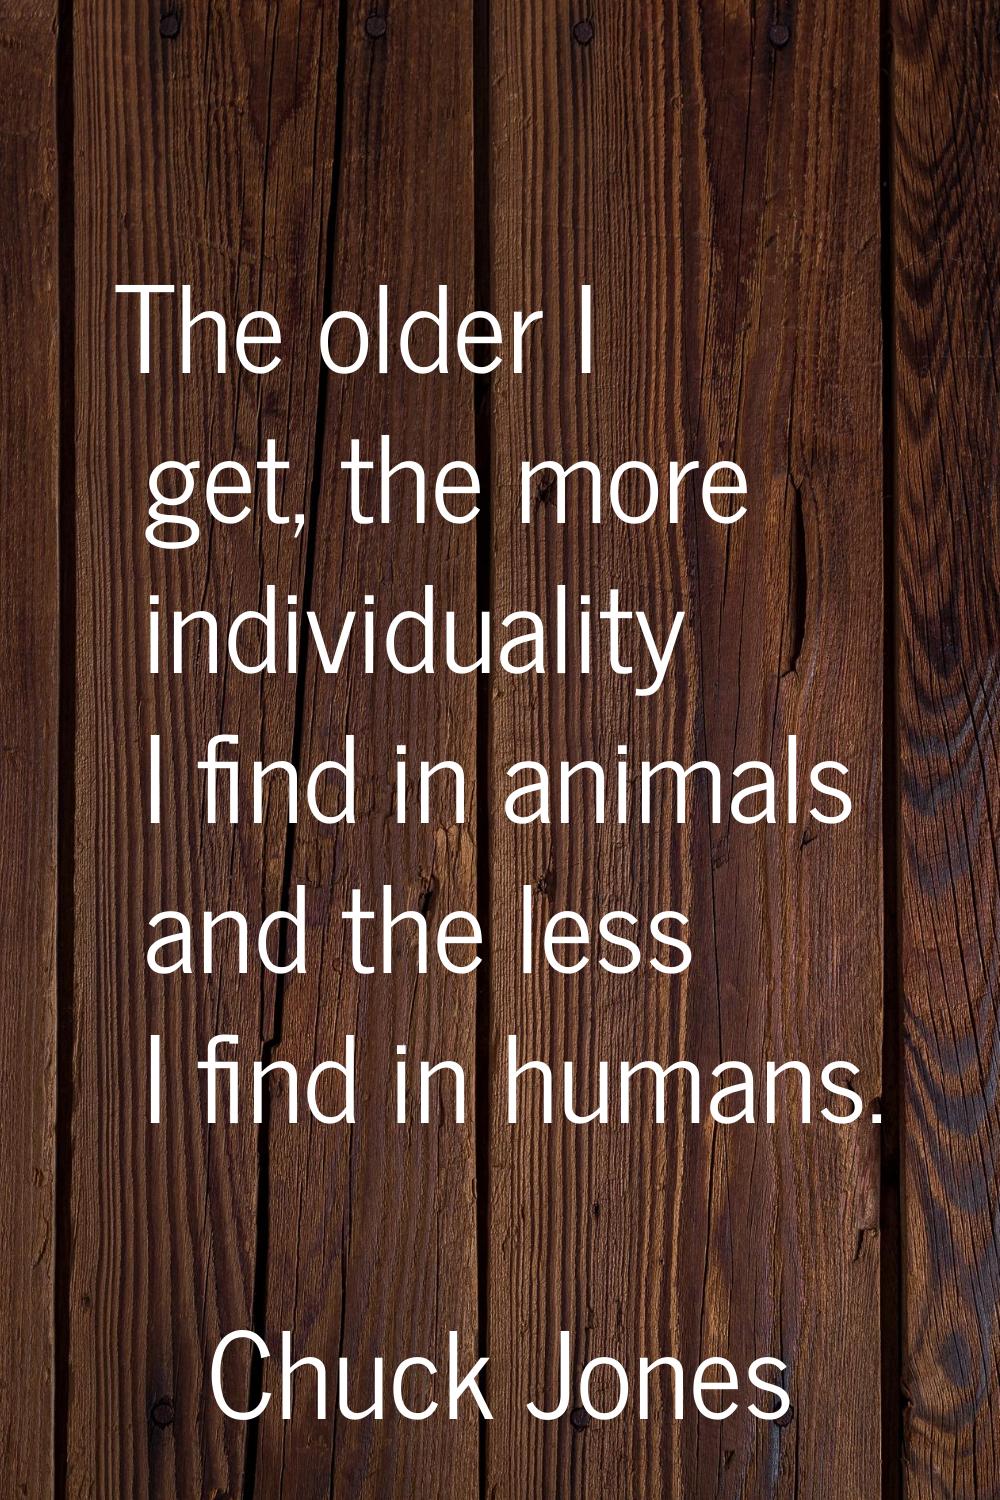 The older I get, the more individuality I find in animals and the less I find in humans.